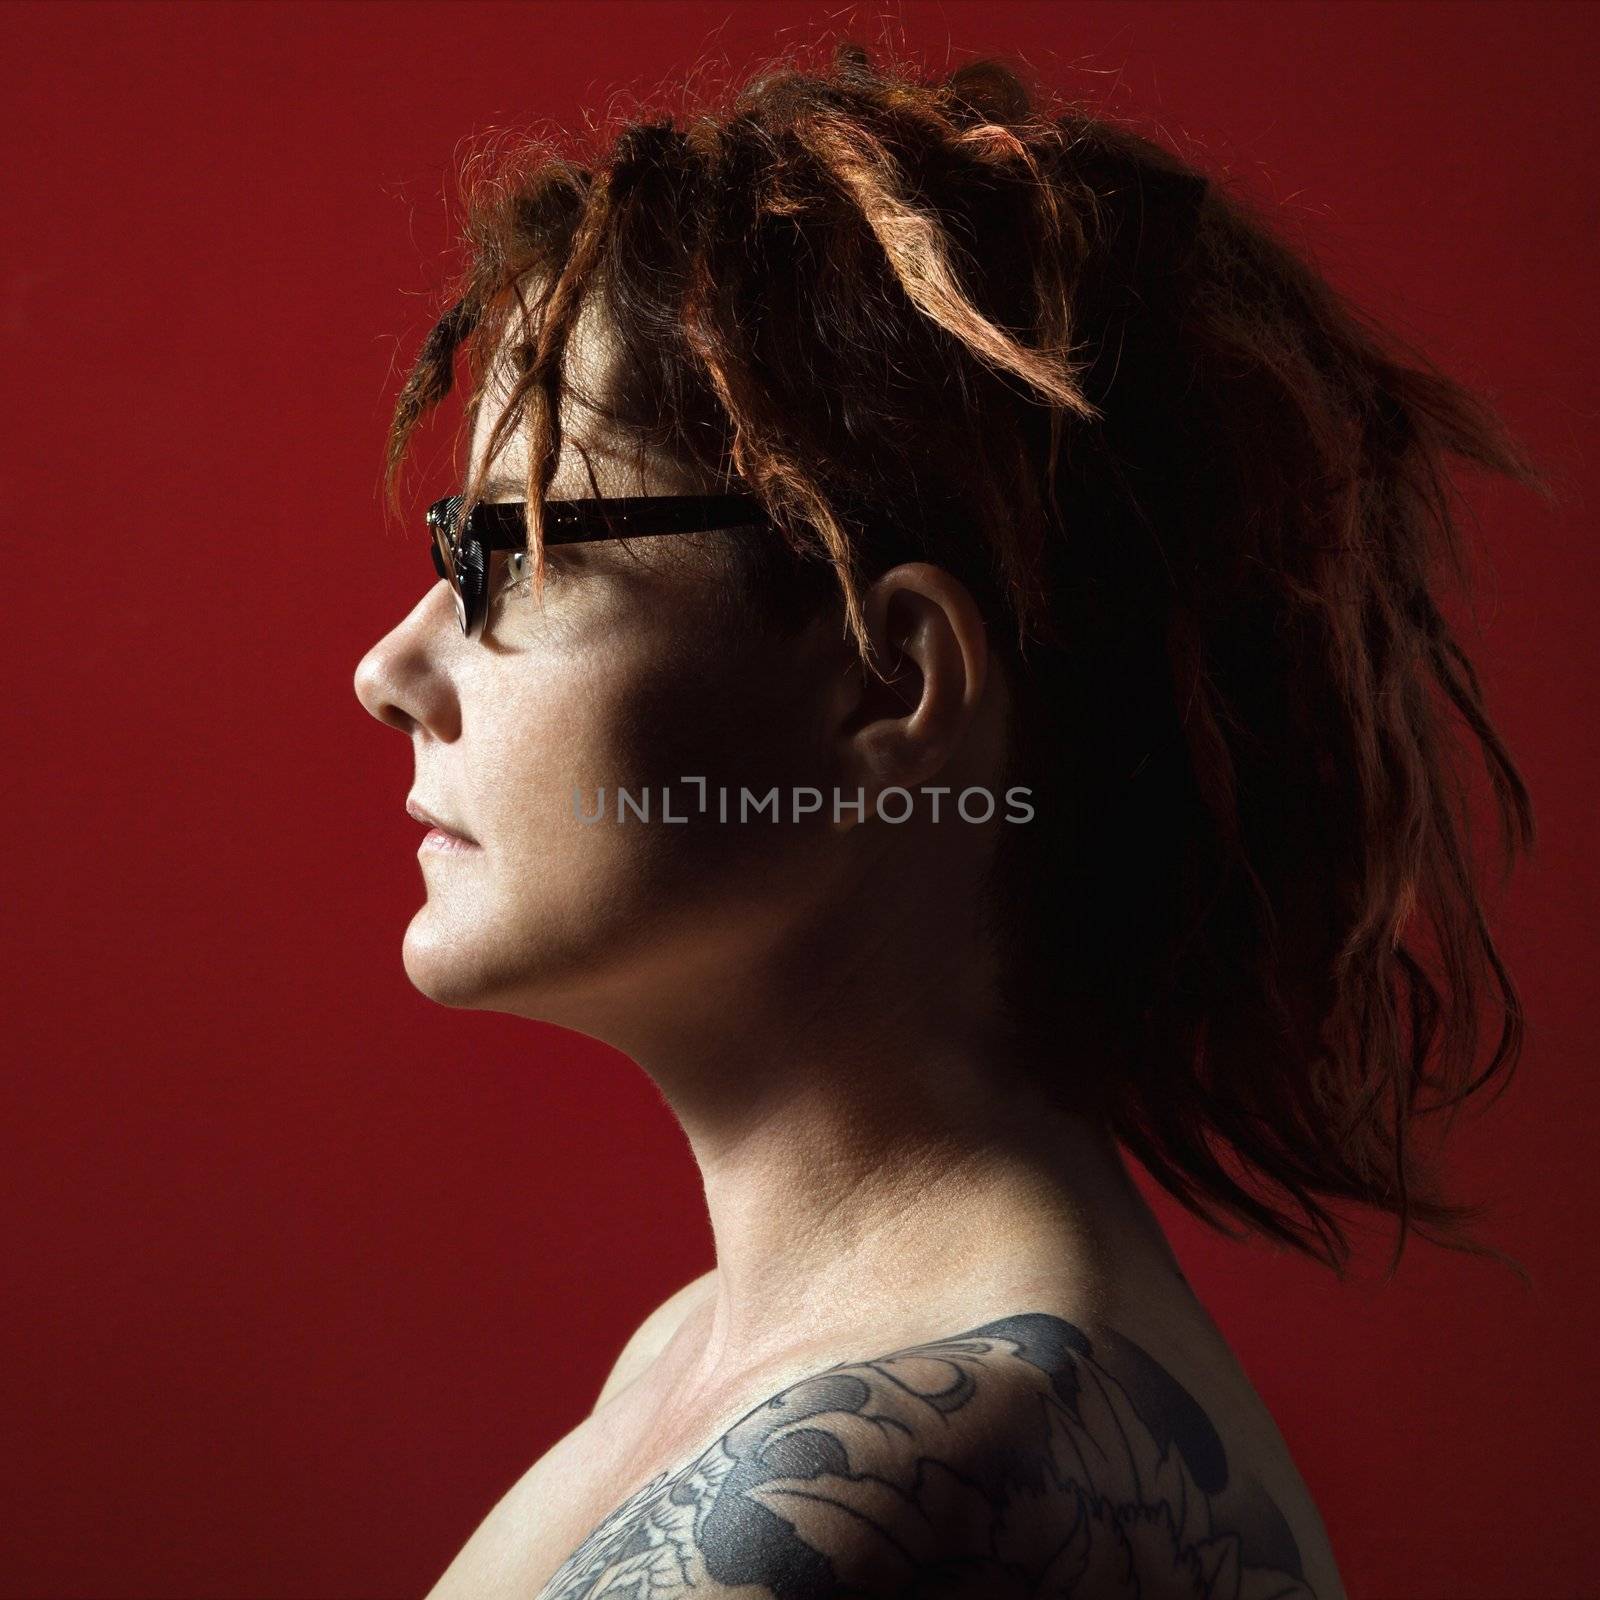 Profile portrait of adult woman with tattoos.